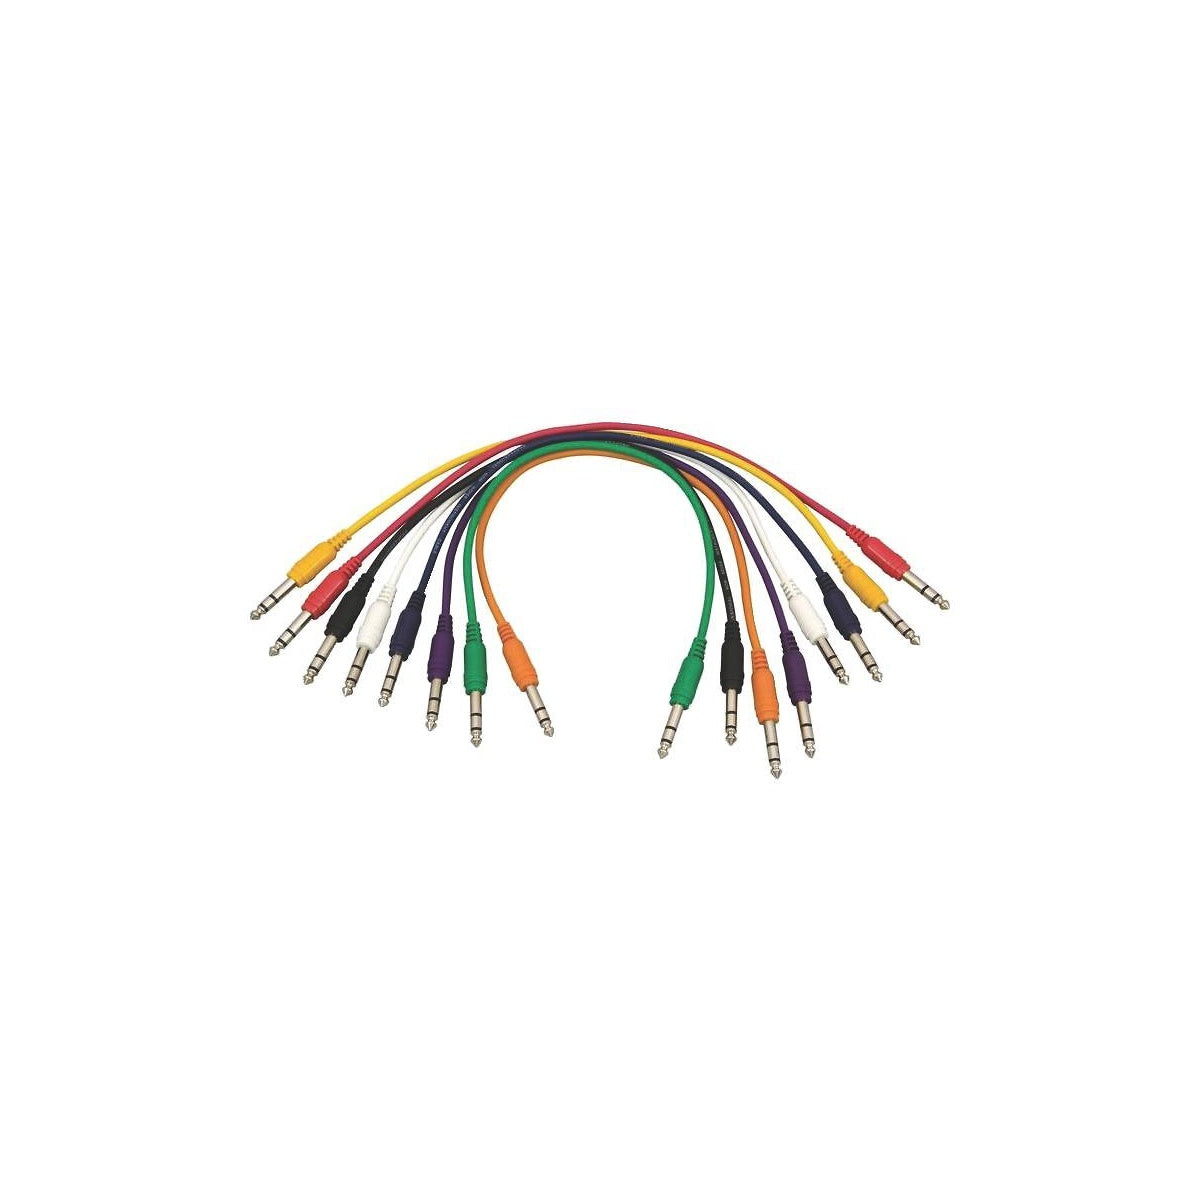 Hot Wires Balanced Patch Cables, PC1817TRSS, Straight End, 8-Pack, 17 Inch